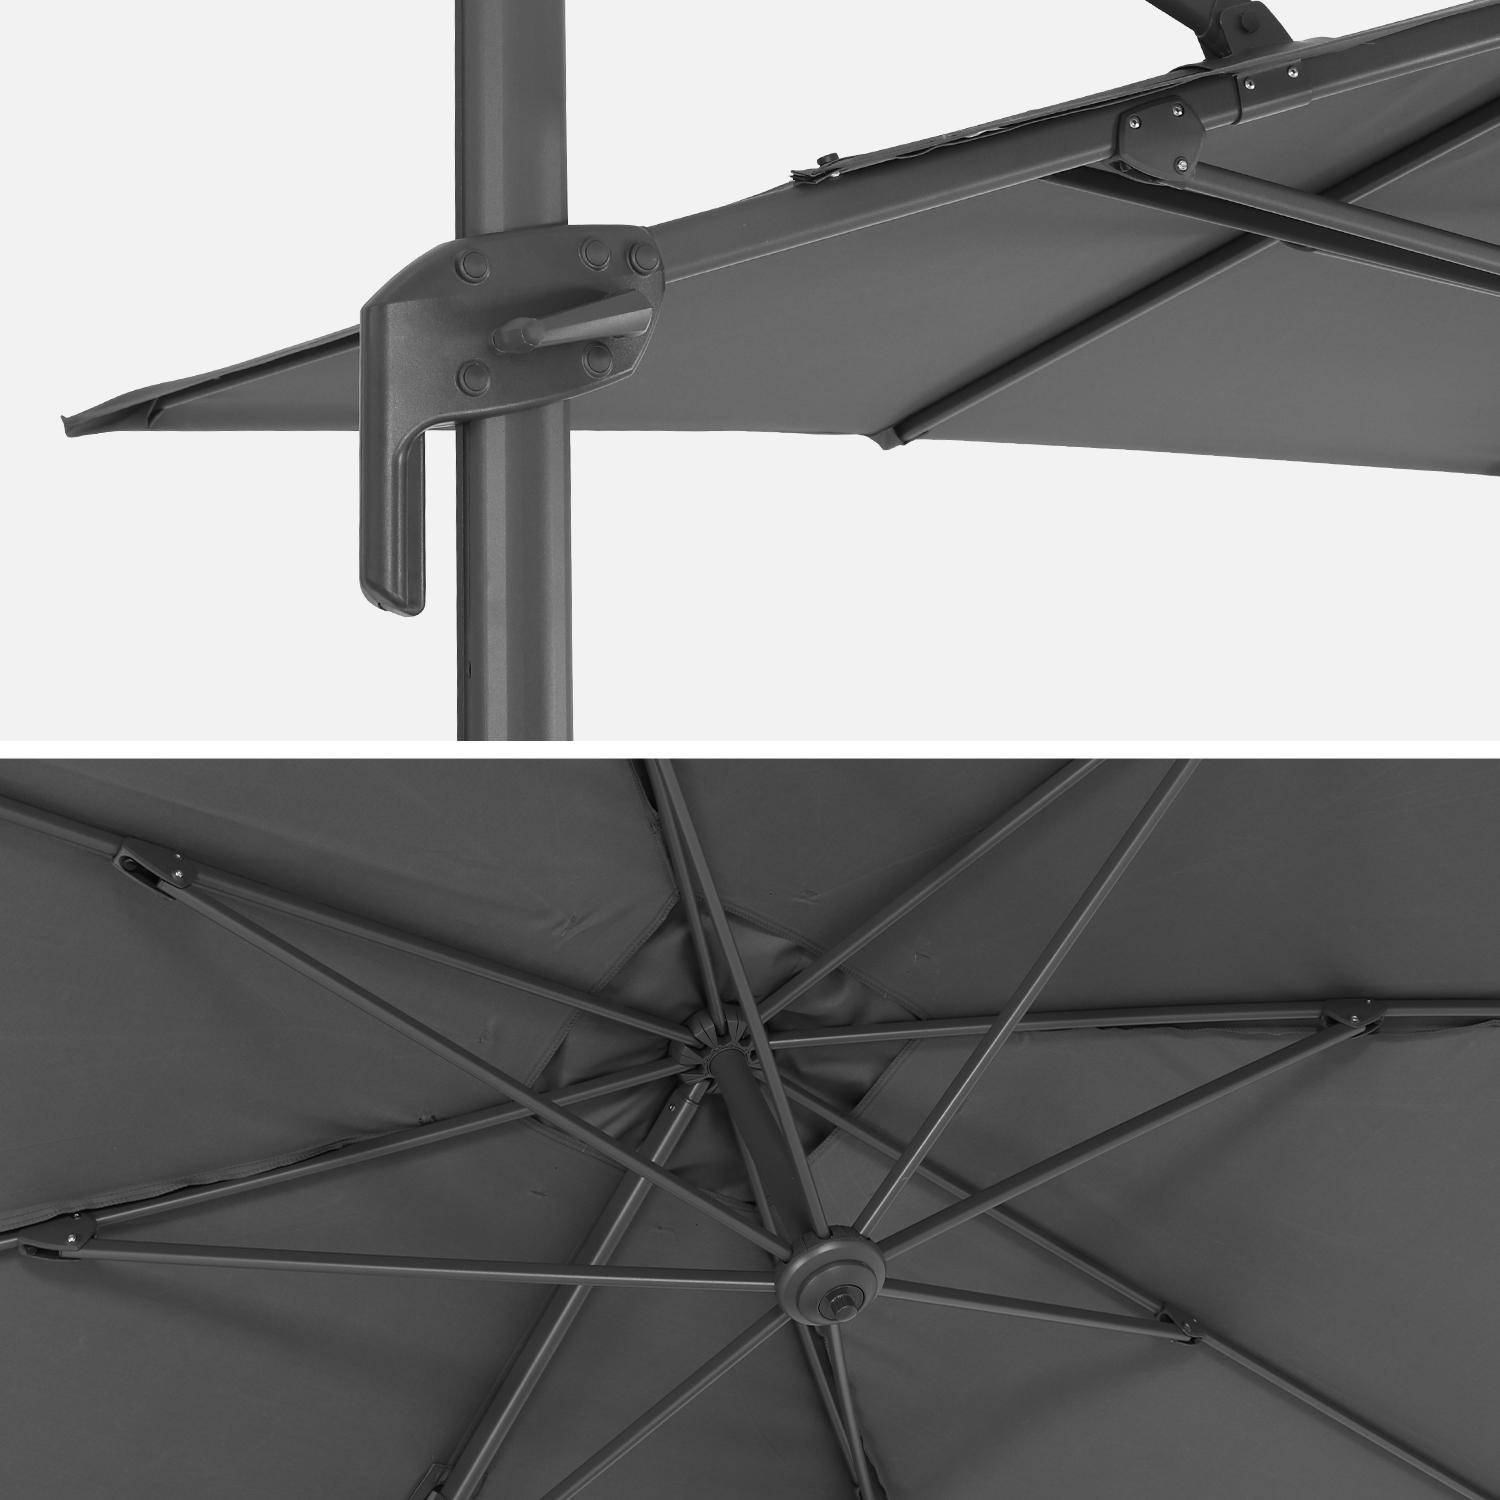 2x3m rectangular cantilever paraso - parasol can be tilted, folded and rotated 360 degreesl - Antibes - Grey Photo7